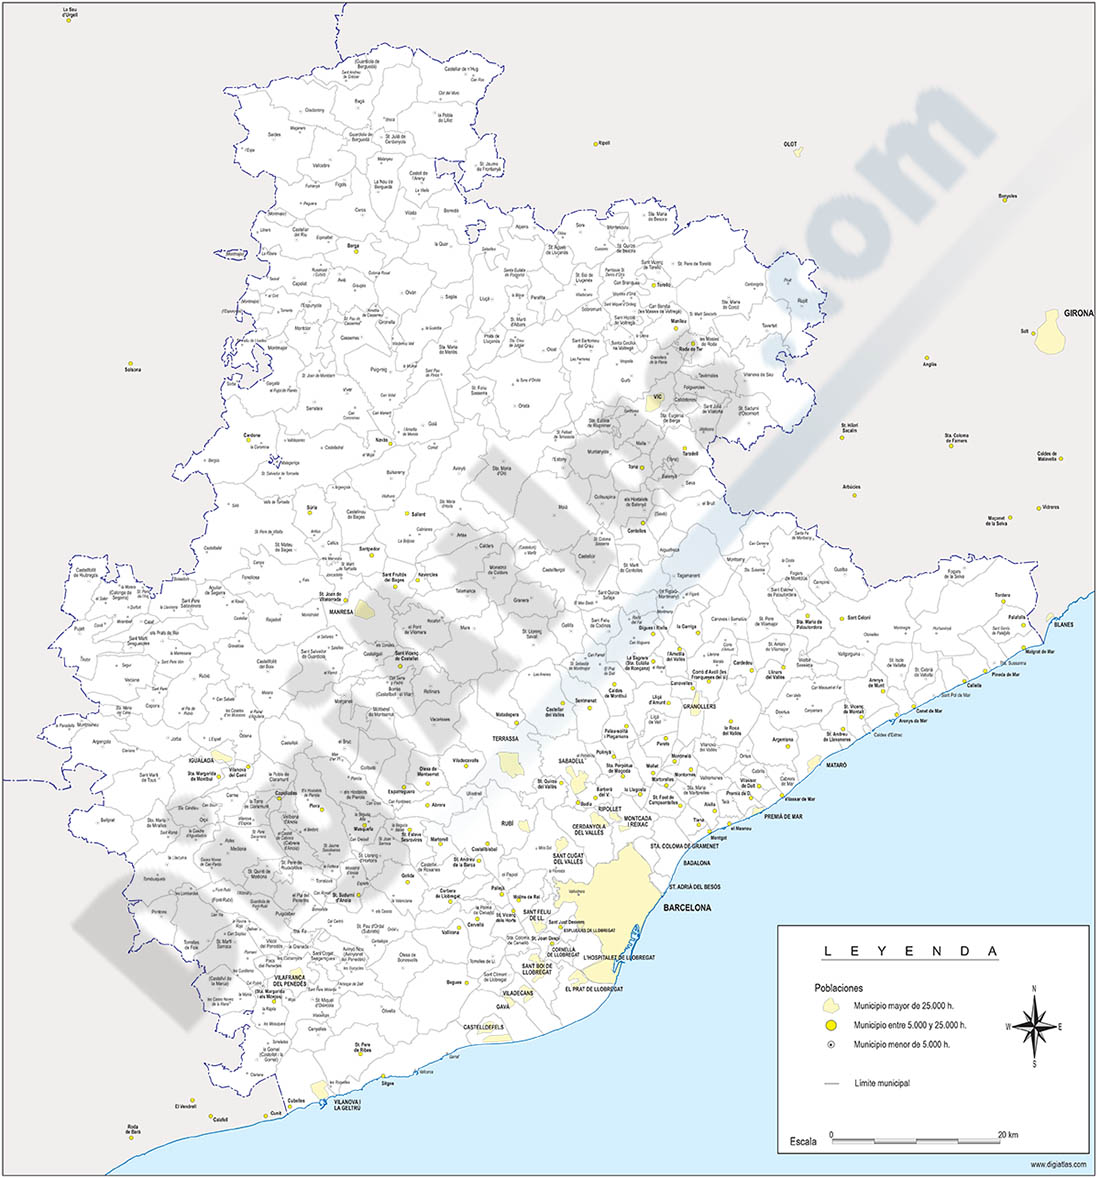 Maps of 50 spanish provinces with municipalities and their capitals